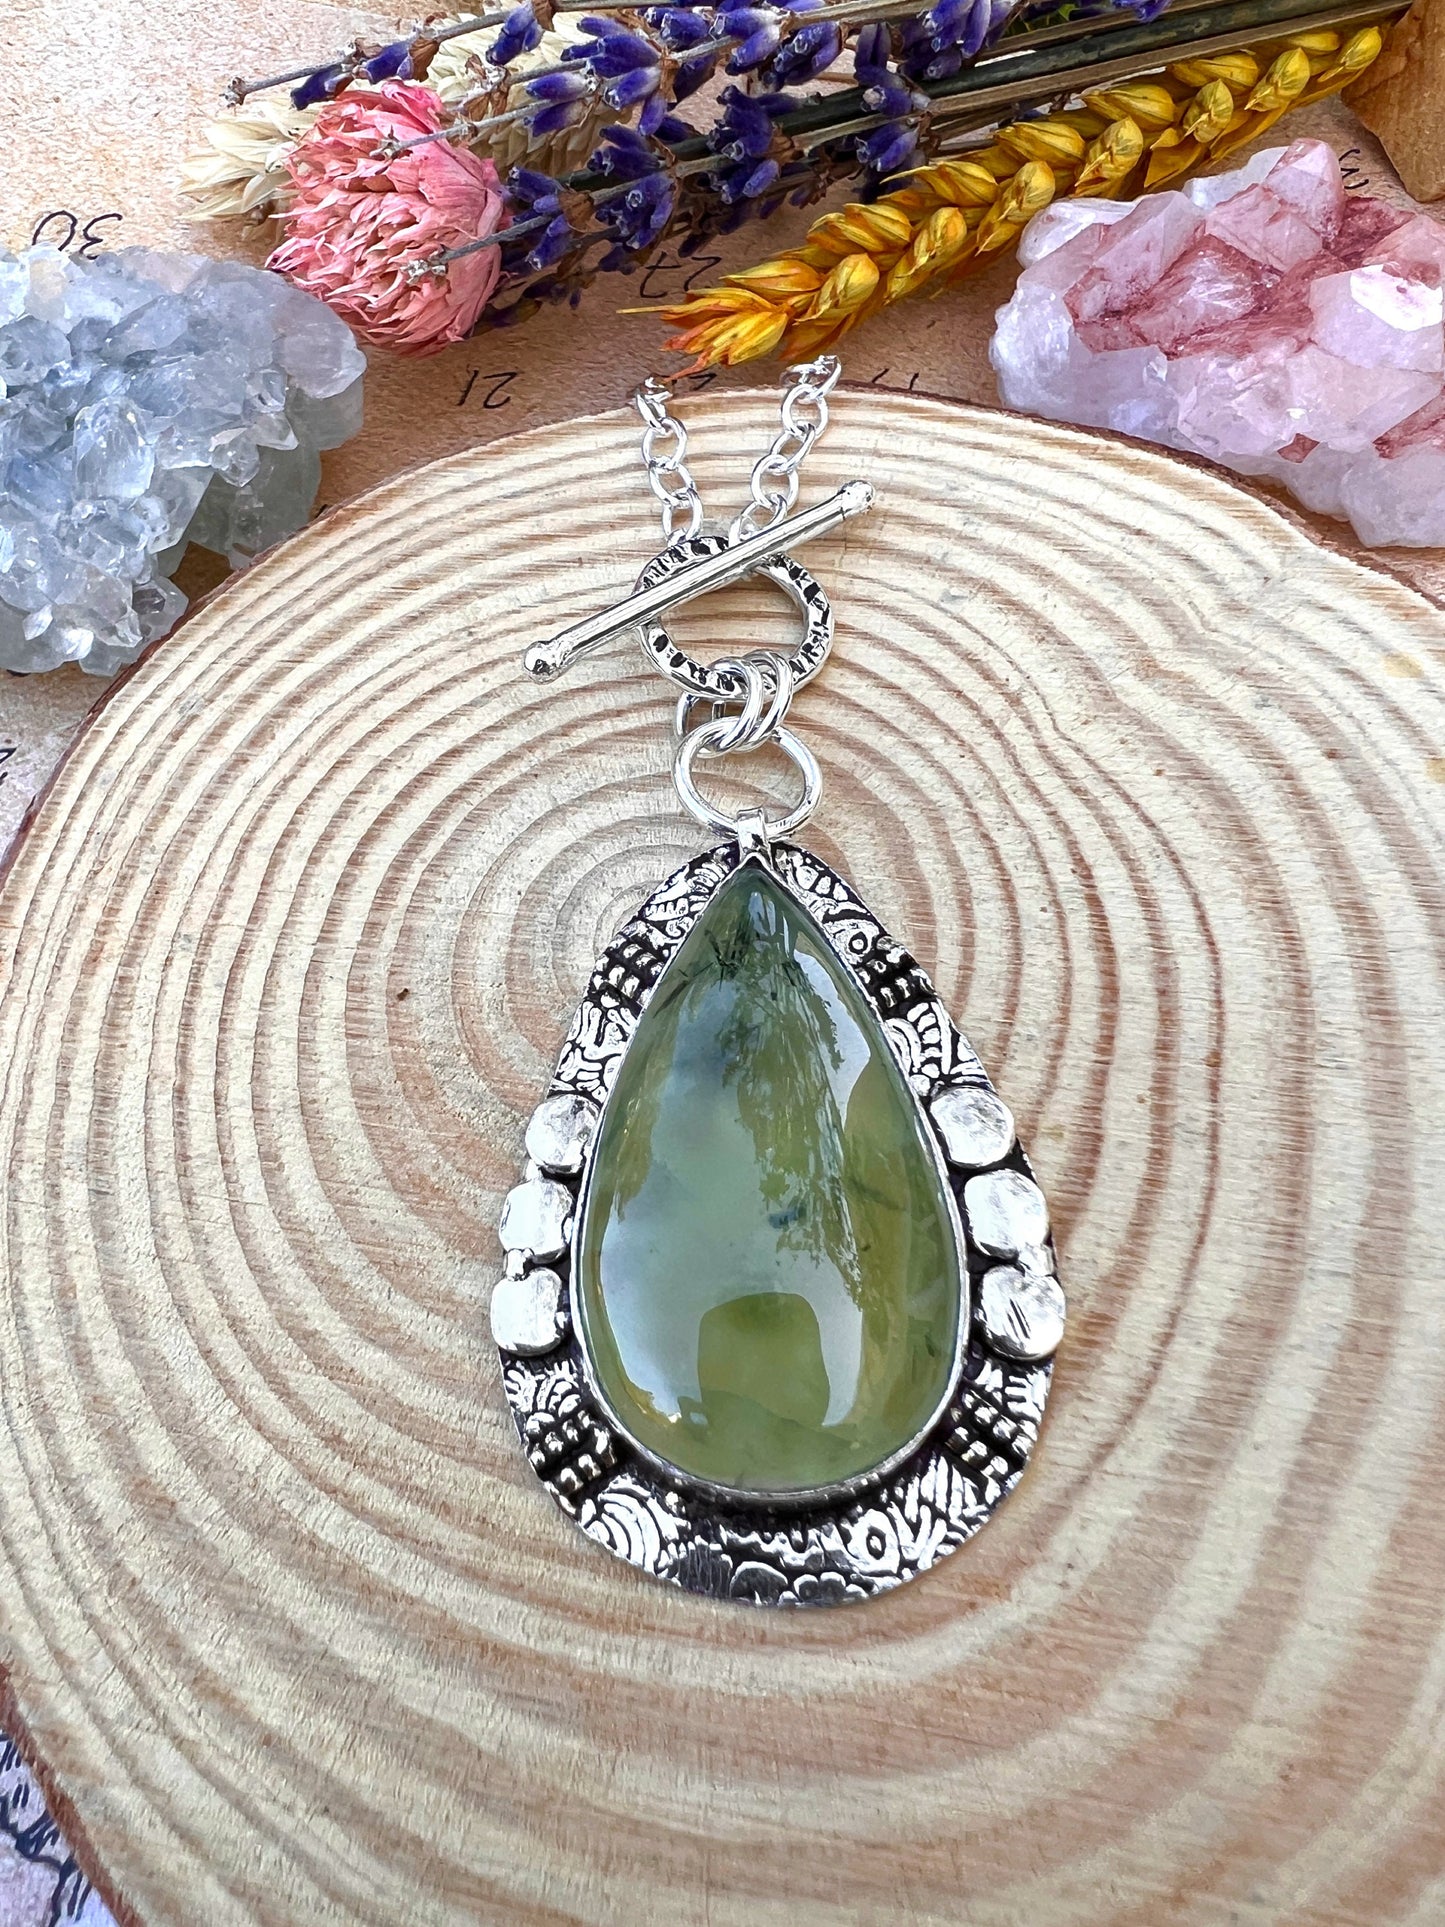 Prehnite Gemstone Pendant Sterling Silver Statement Pendant Gypsy Jewelry Unique Gift For Her